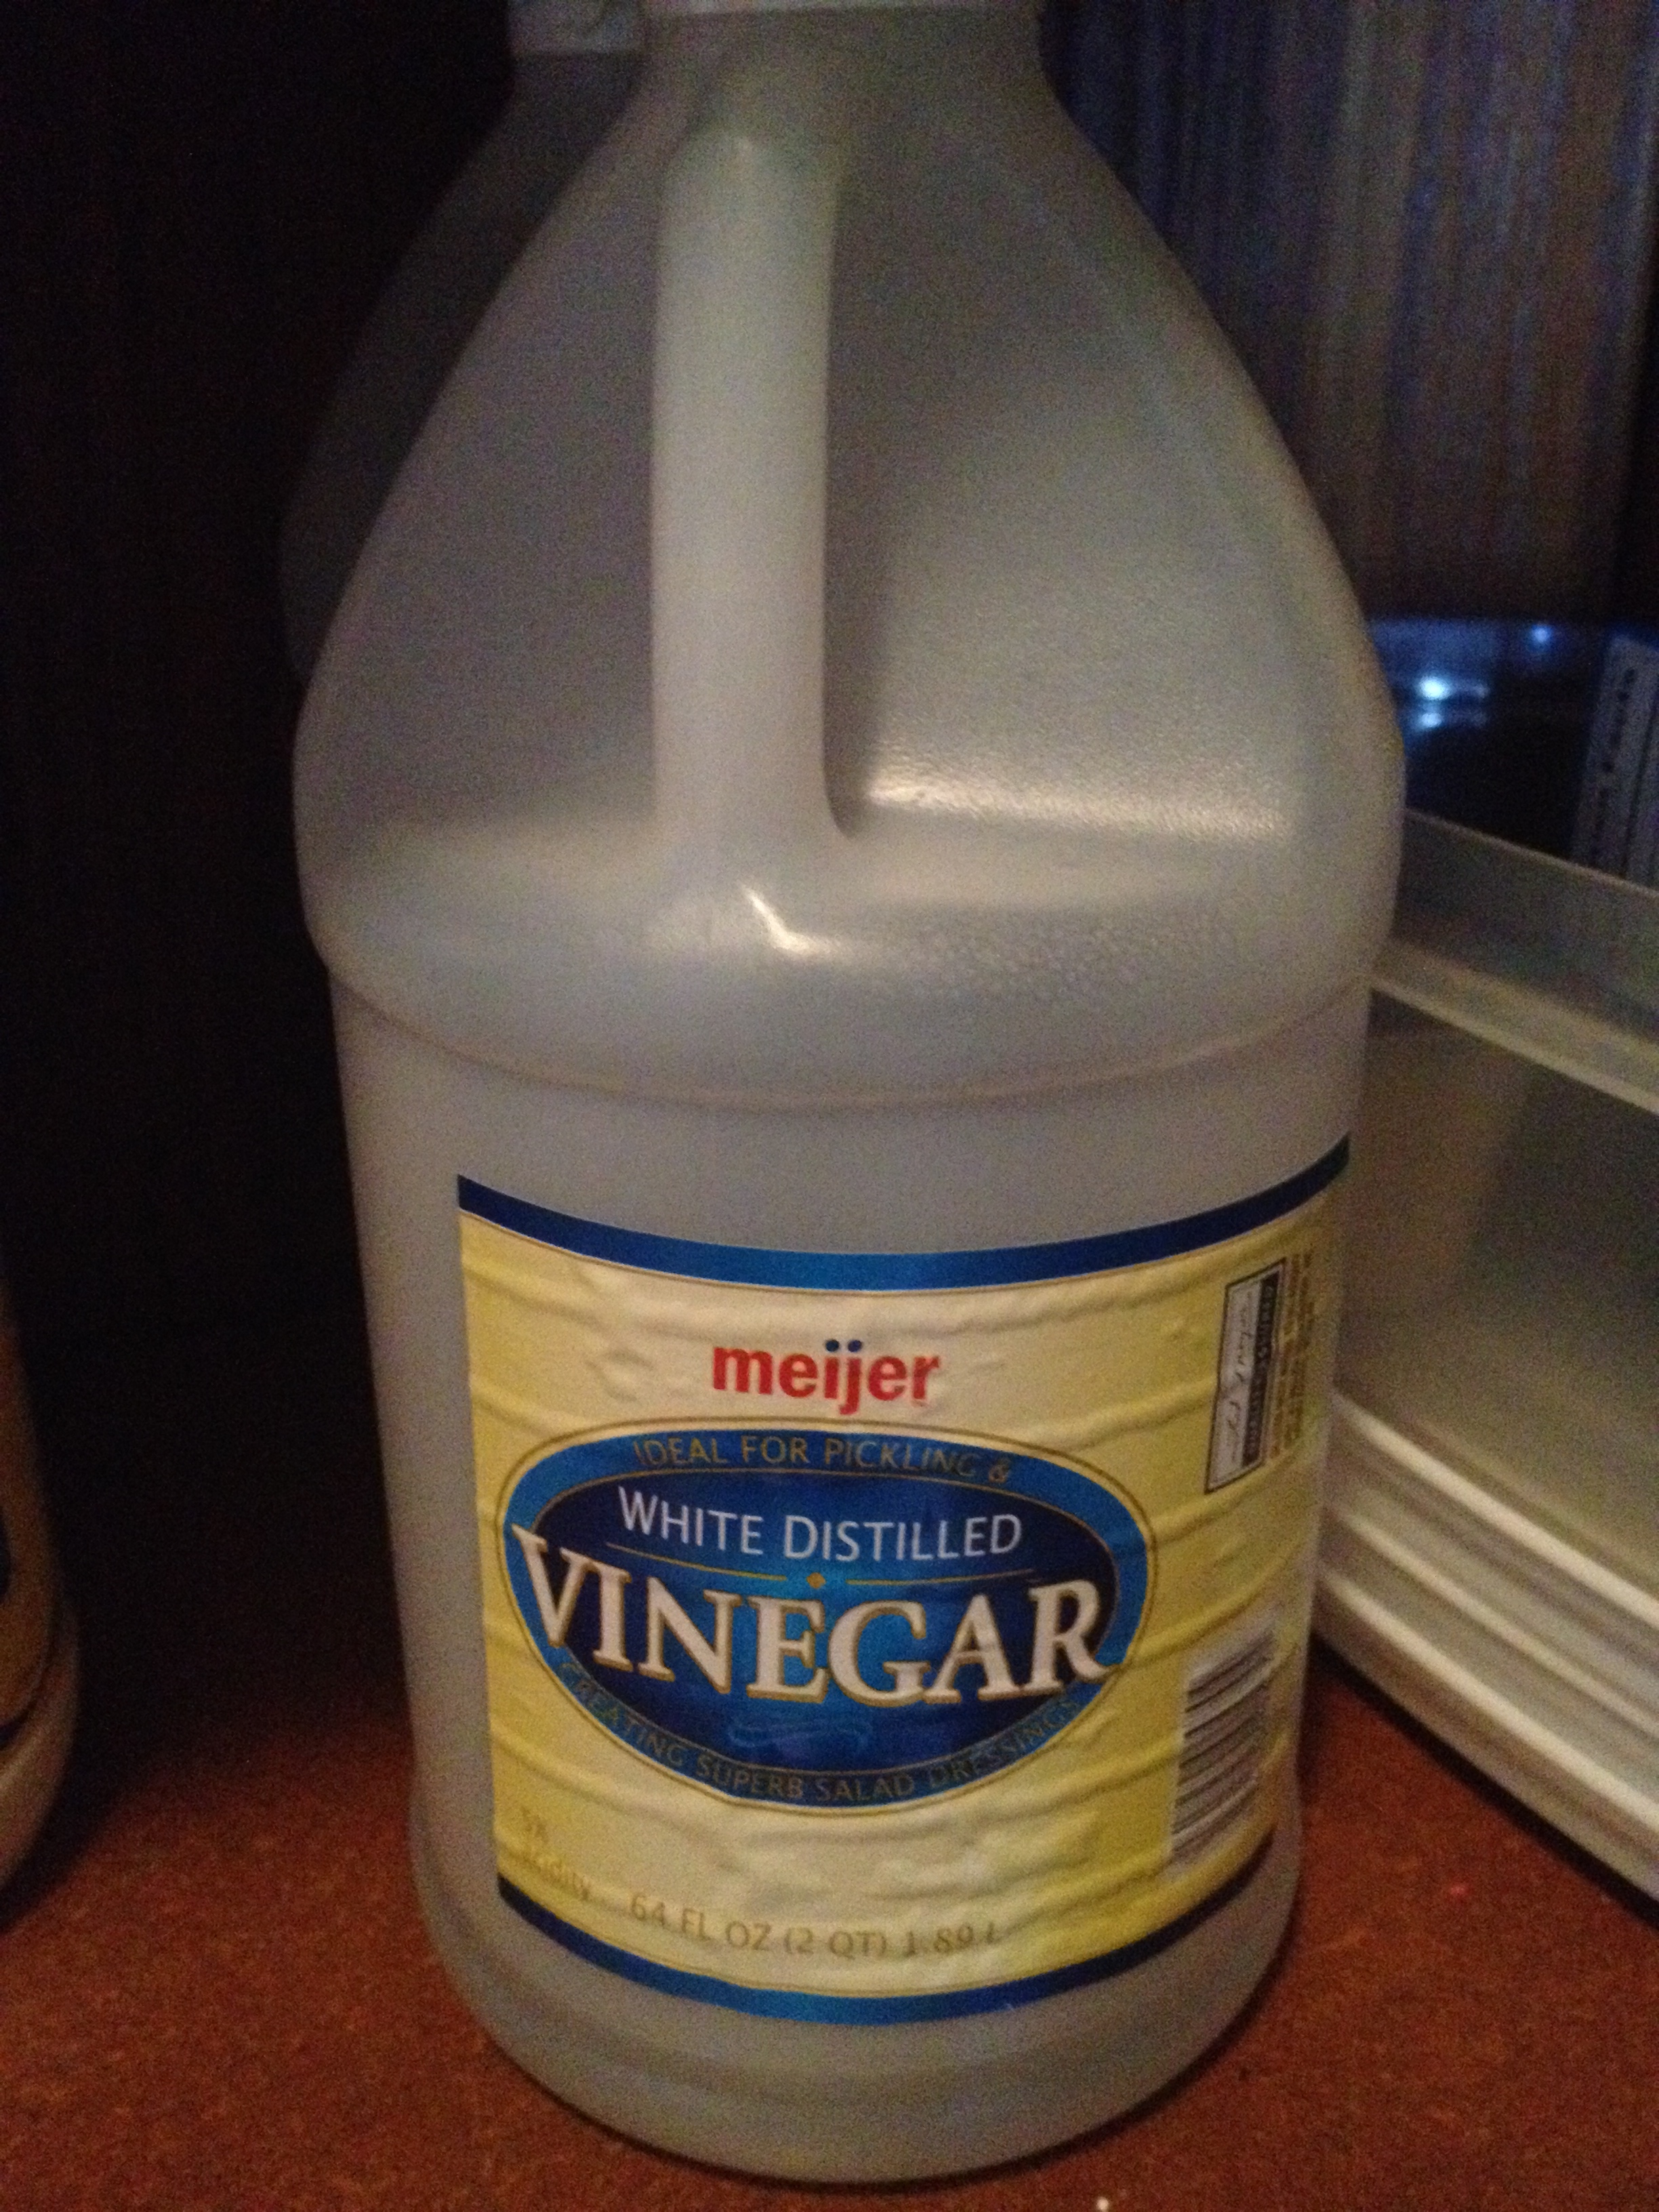 You can use vinegar mixed with water as